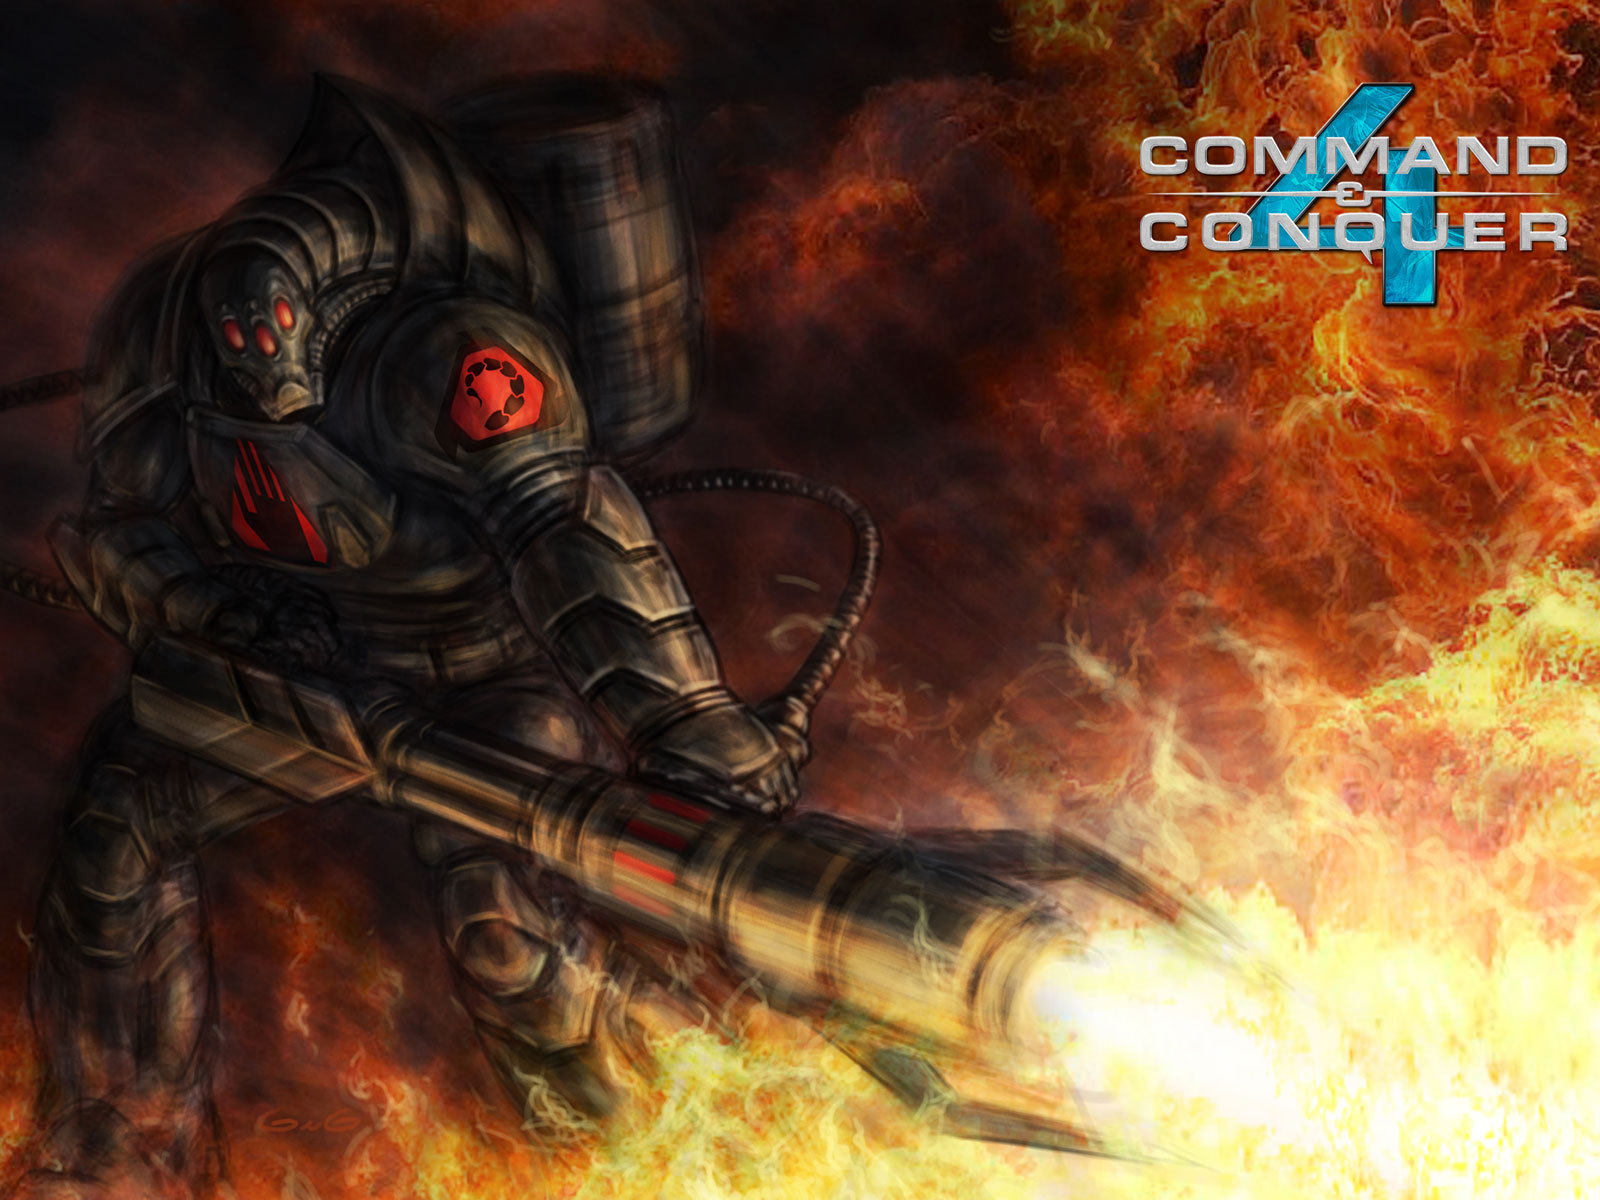 command and conquer wallpaper,action adventure game,demon,cg artwork,adventure game,fictional character